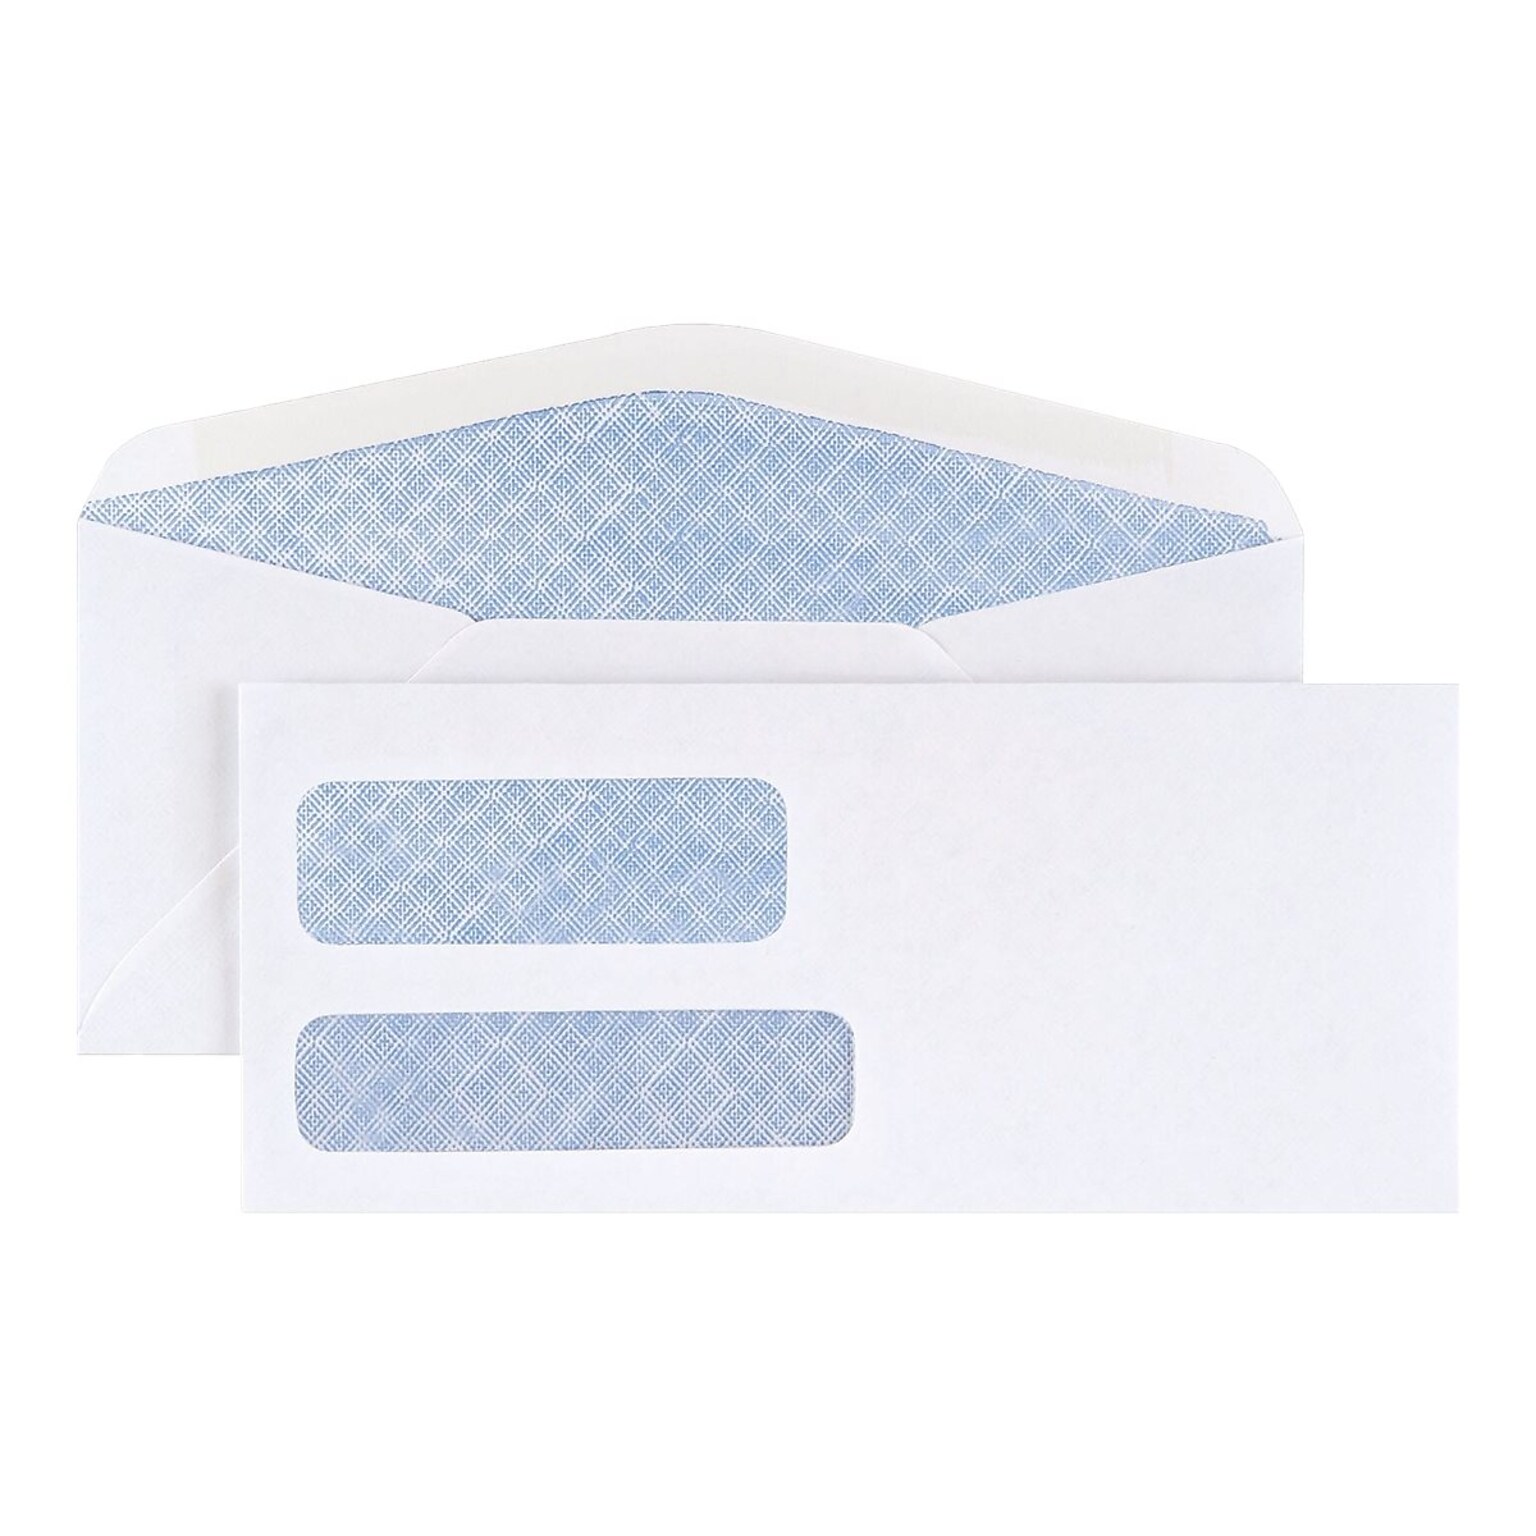 Staples Gummed Security Tinted #10 Business Envelopes, 4 1/8 x 9 1/2, White, 2500/Box (20137CT)